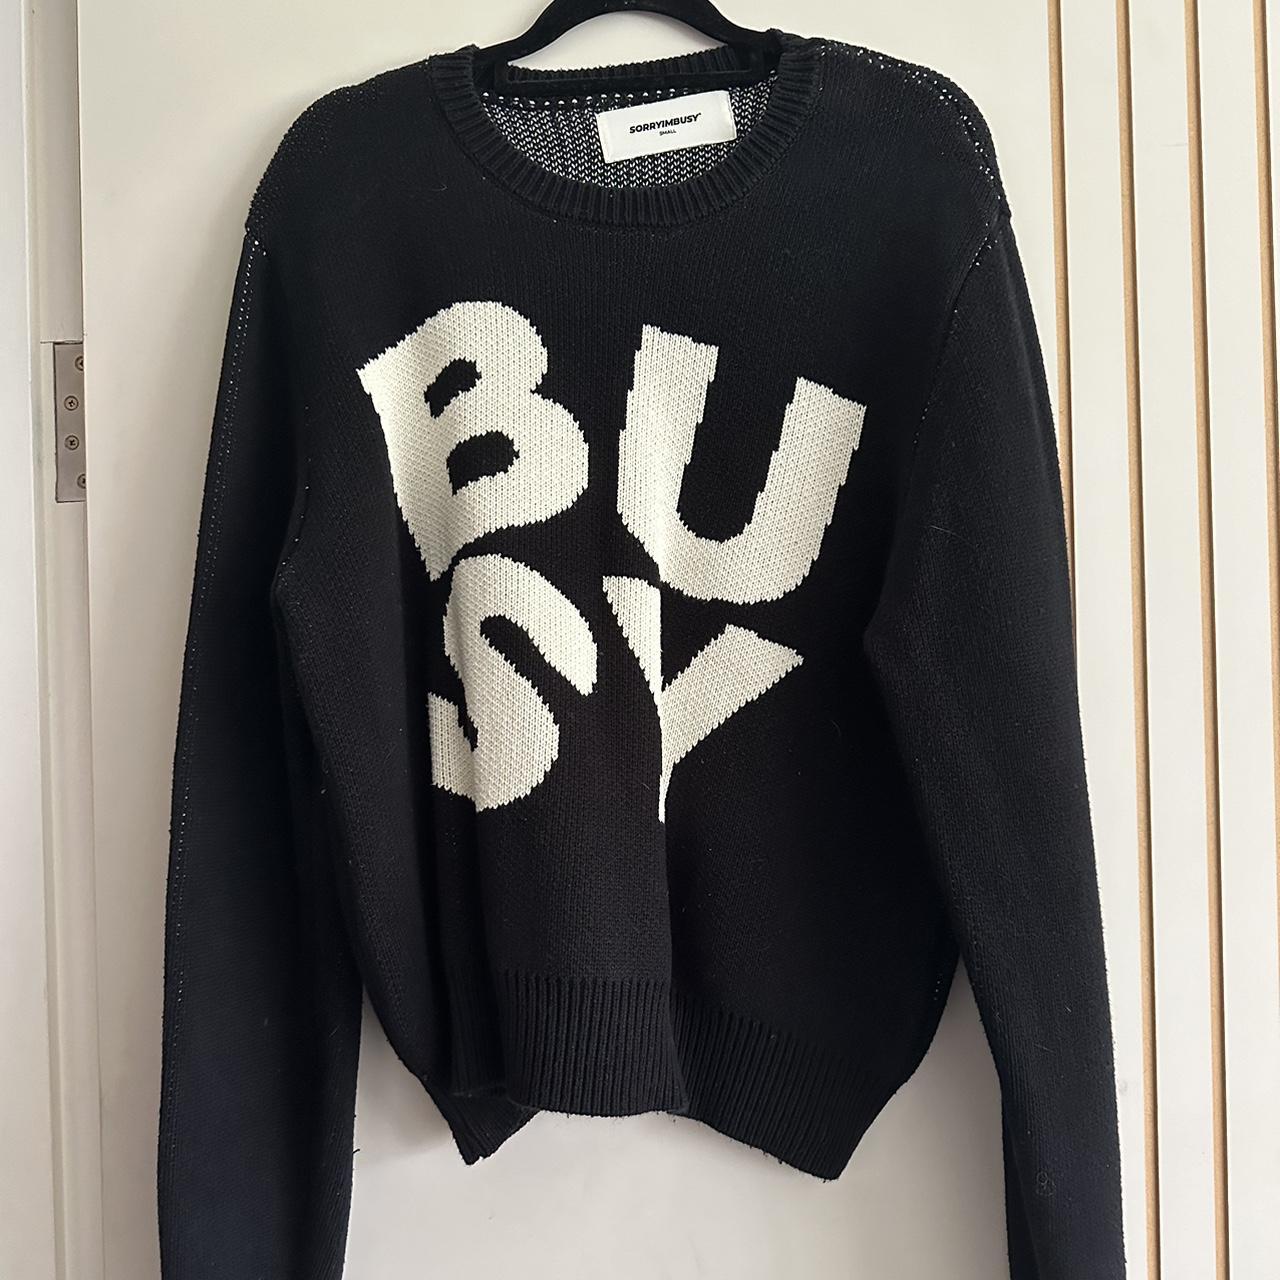 Sorryimbusy jumper size small Great condition, worn... - Depop